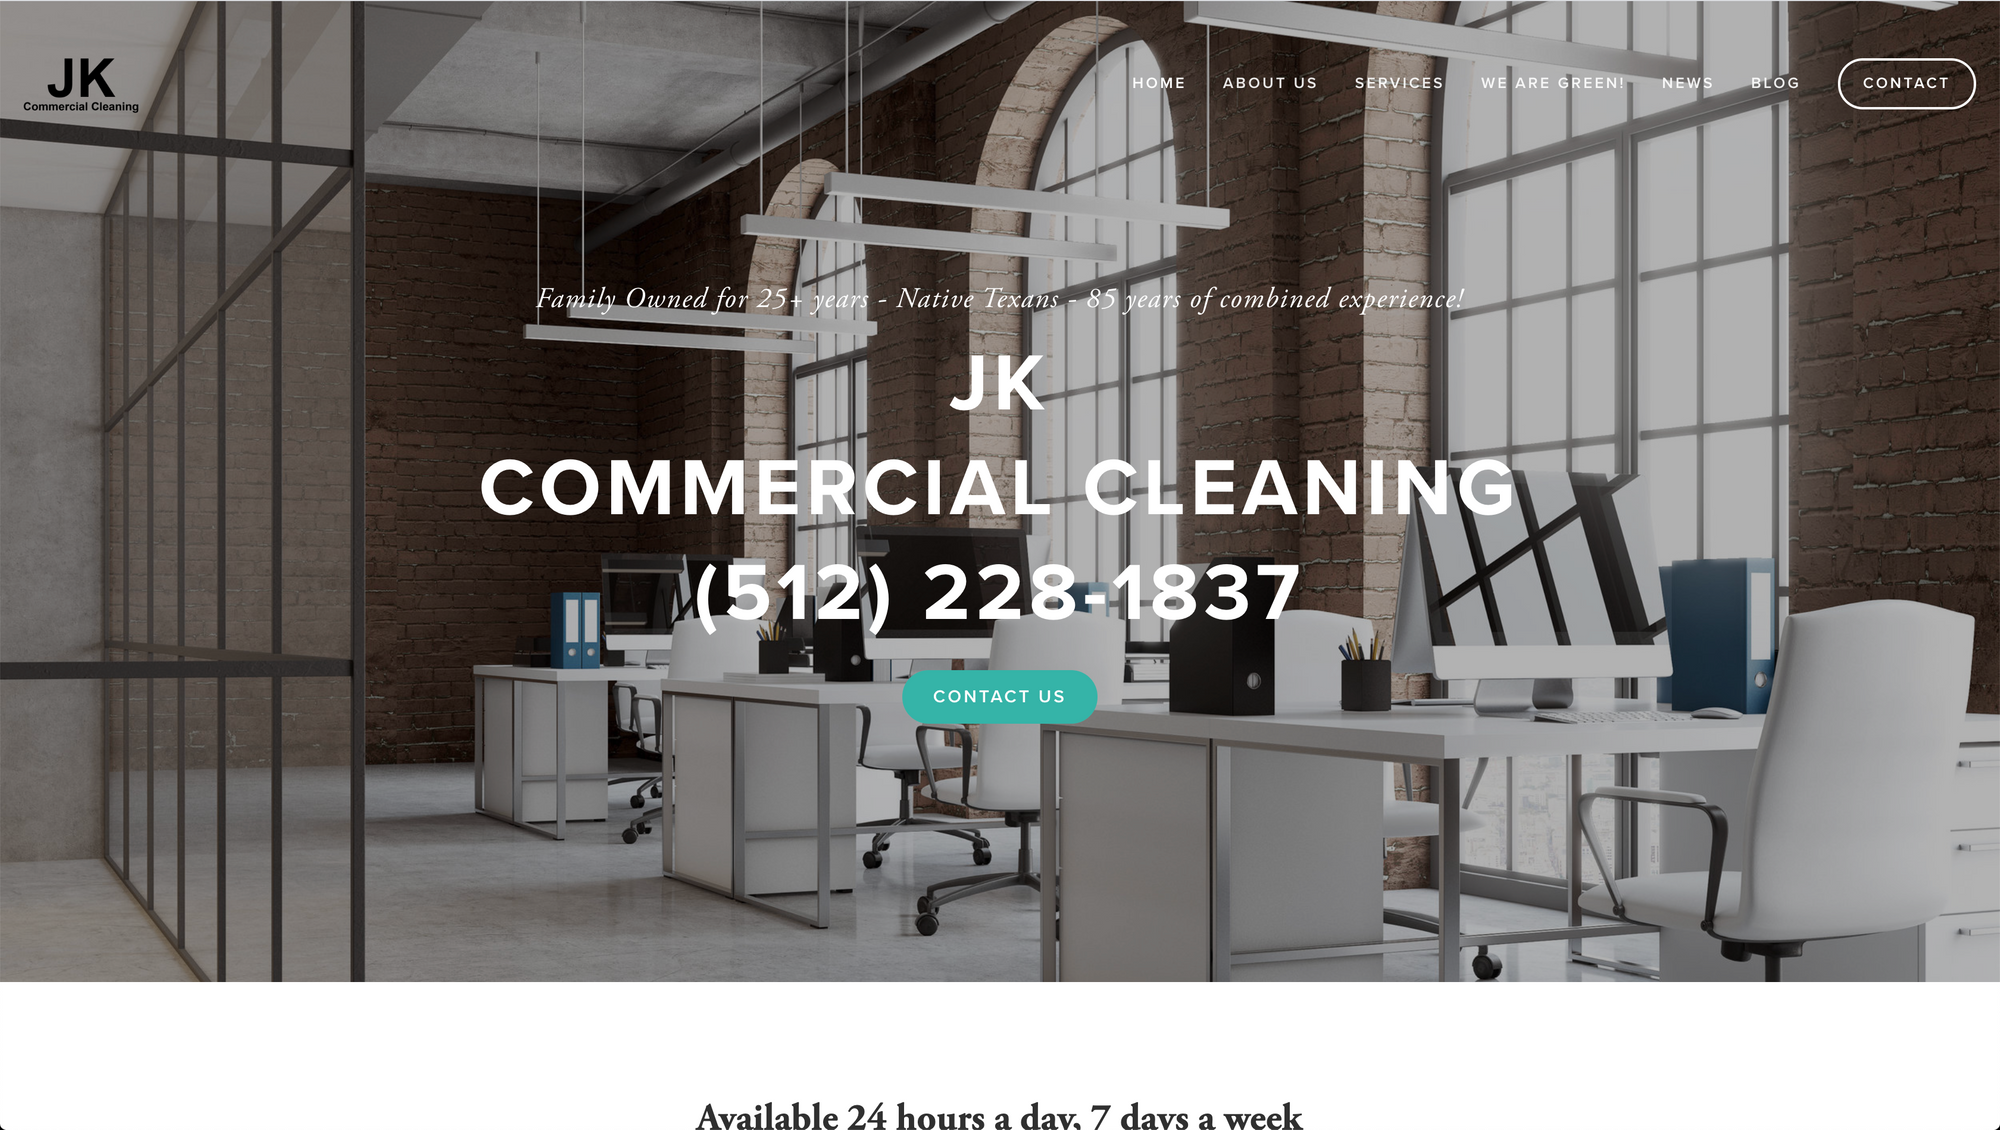 Jk Commercial Cleaning